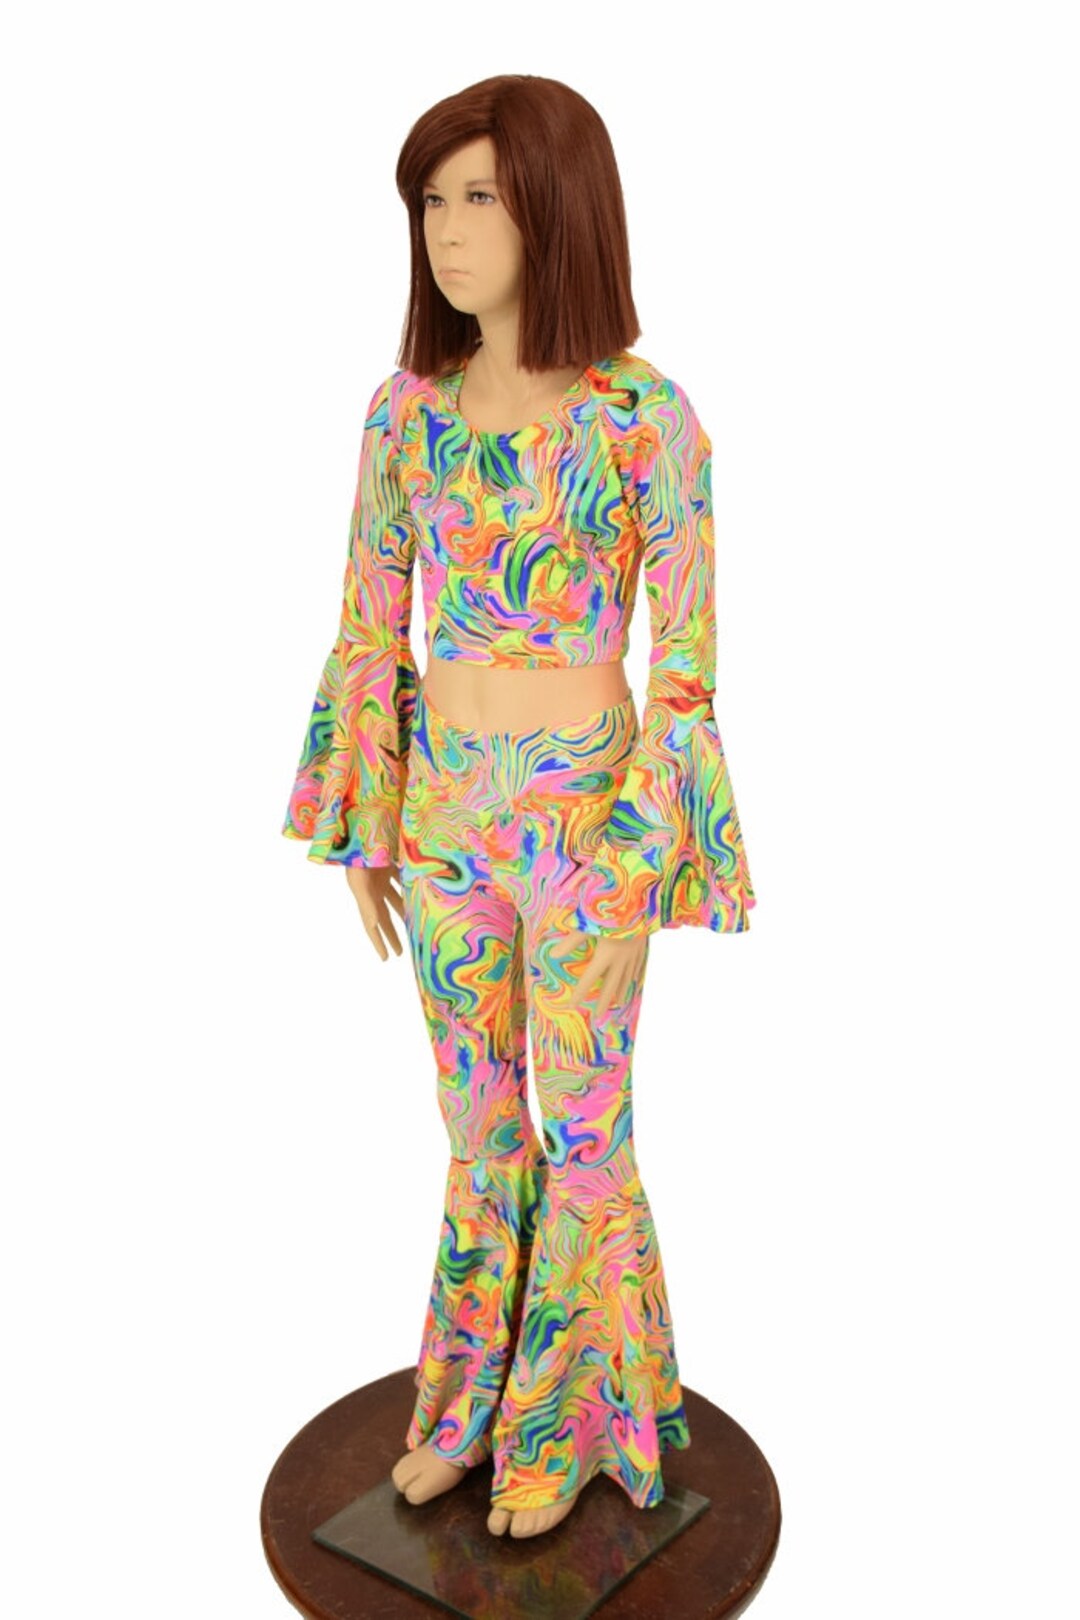 Neon Flux UV GLOW Bell Bottom Flares and Trumpet Sleeve Crop - Etsy